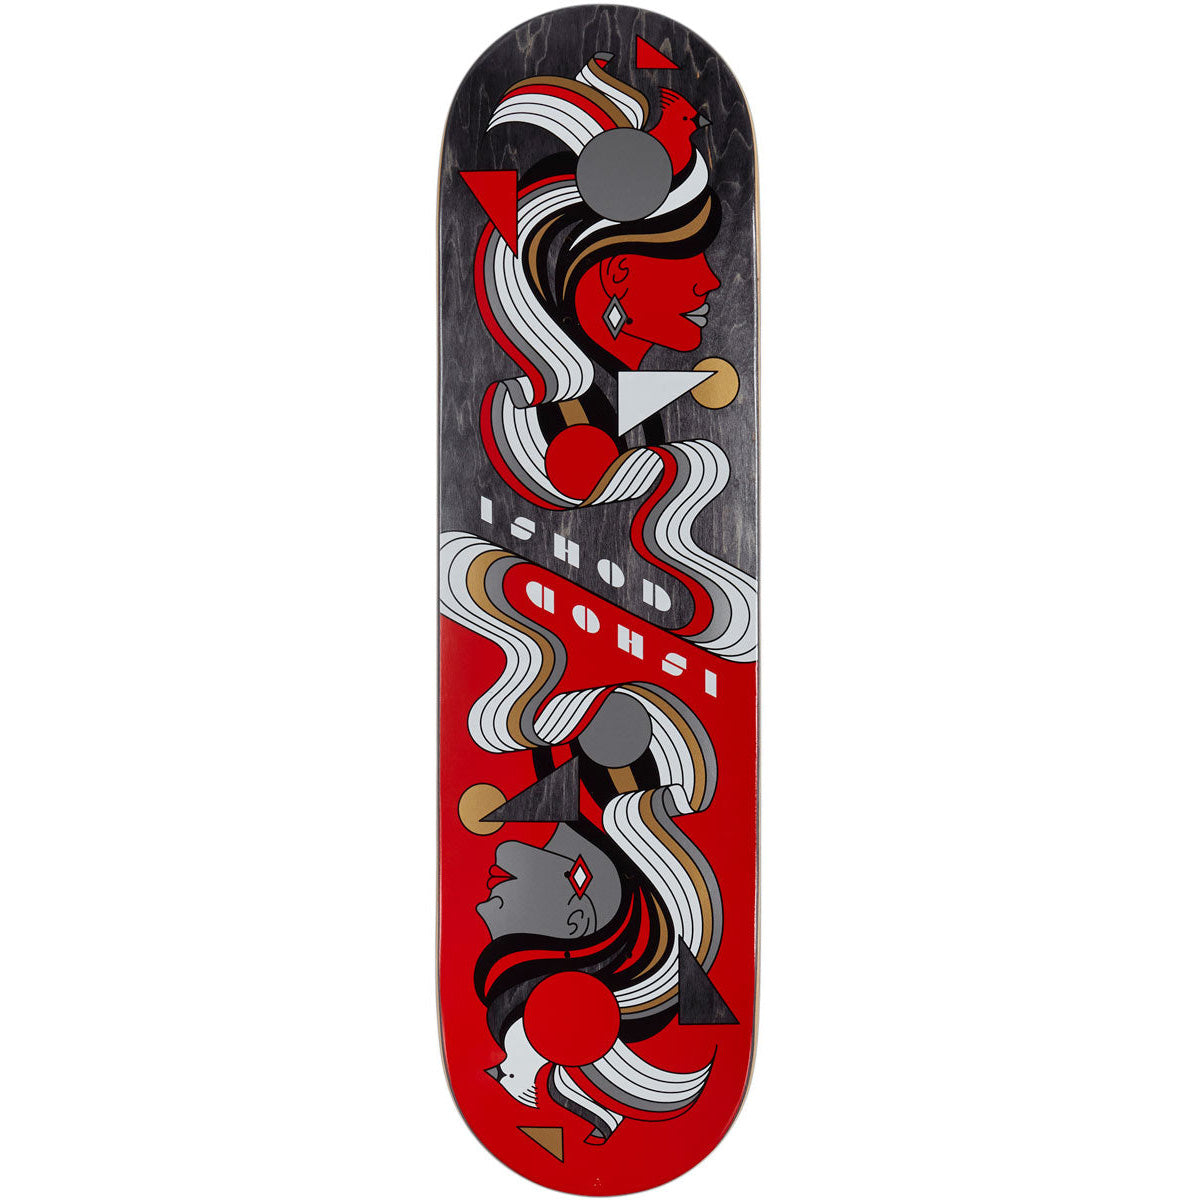 Real Ishod Fowls Deck Twin Tails 8.5"